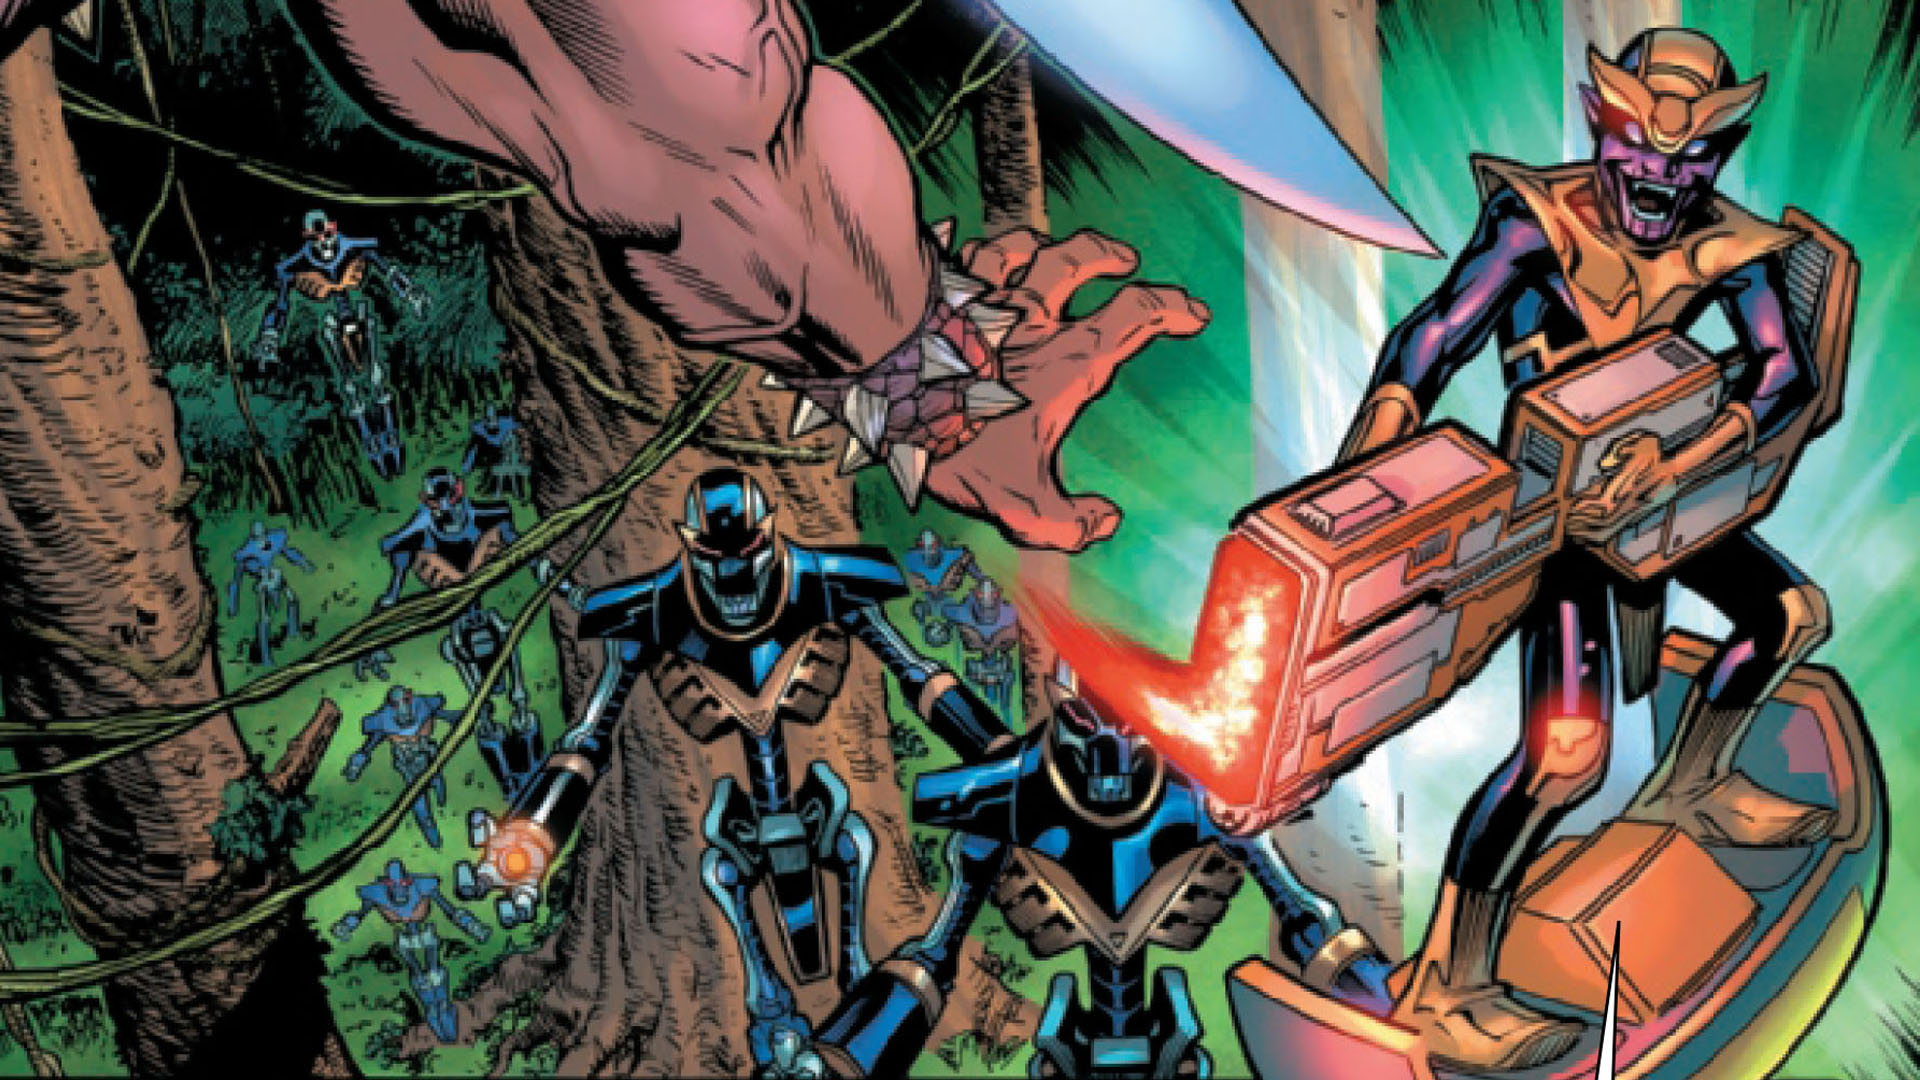 Kid Thanos is coming to murder Earth in Avengers #50 / #750 preview |  GamesRadar+